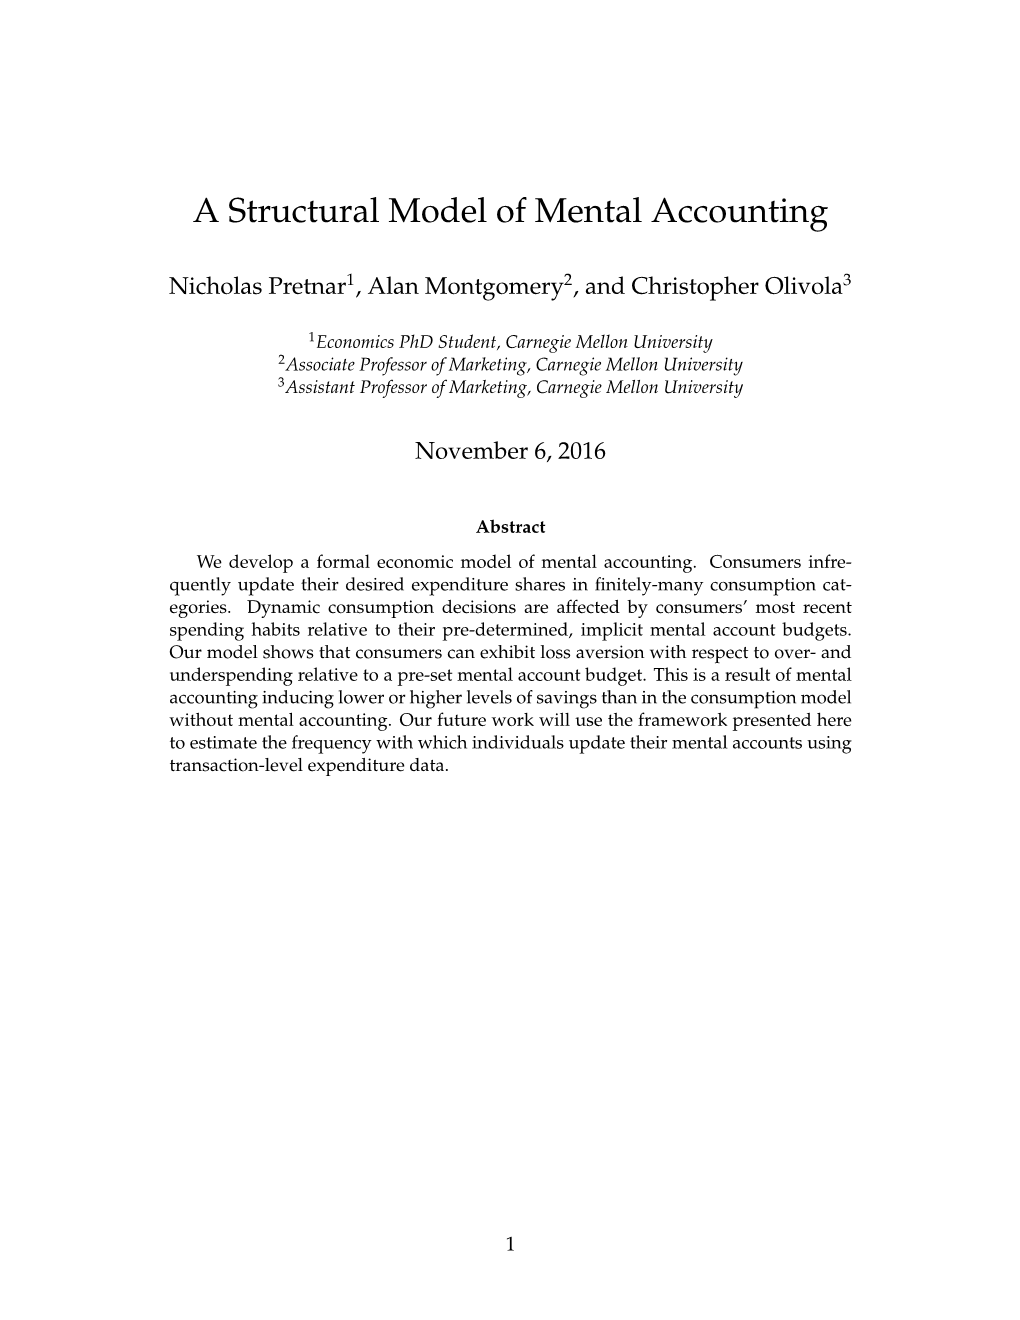 A Structural Model of Mental Accounting